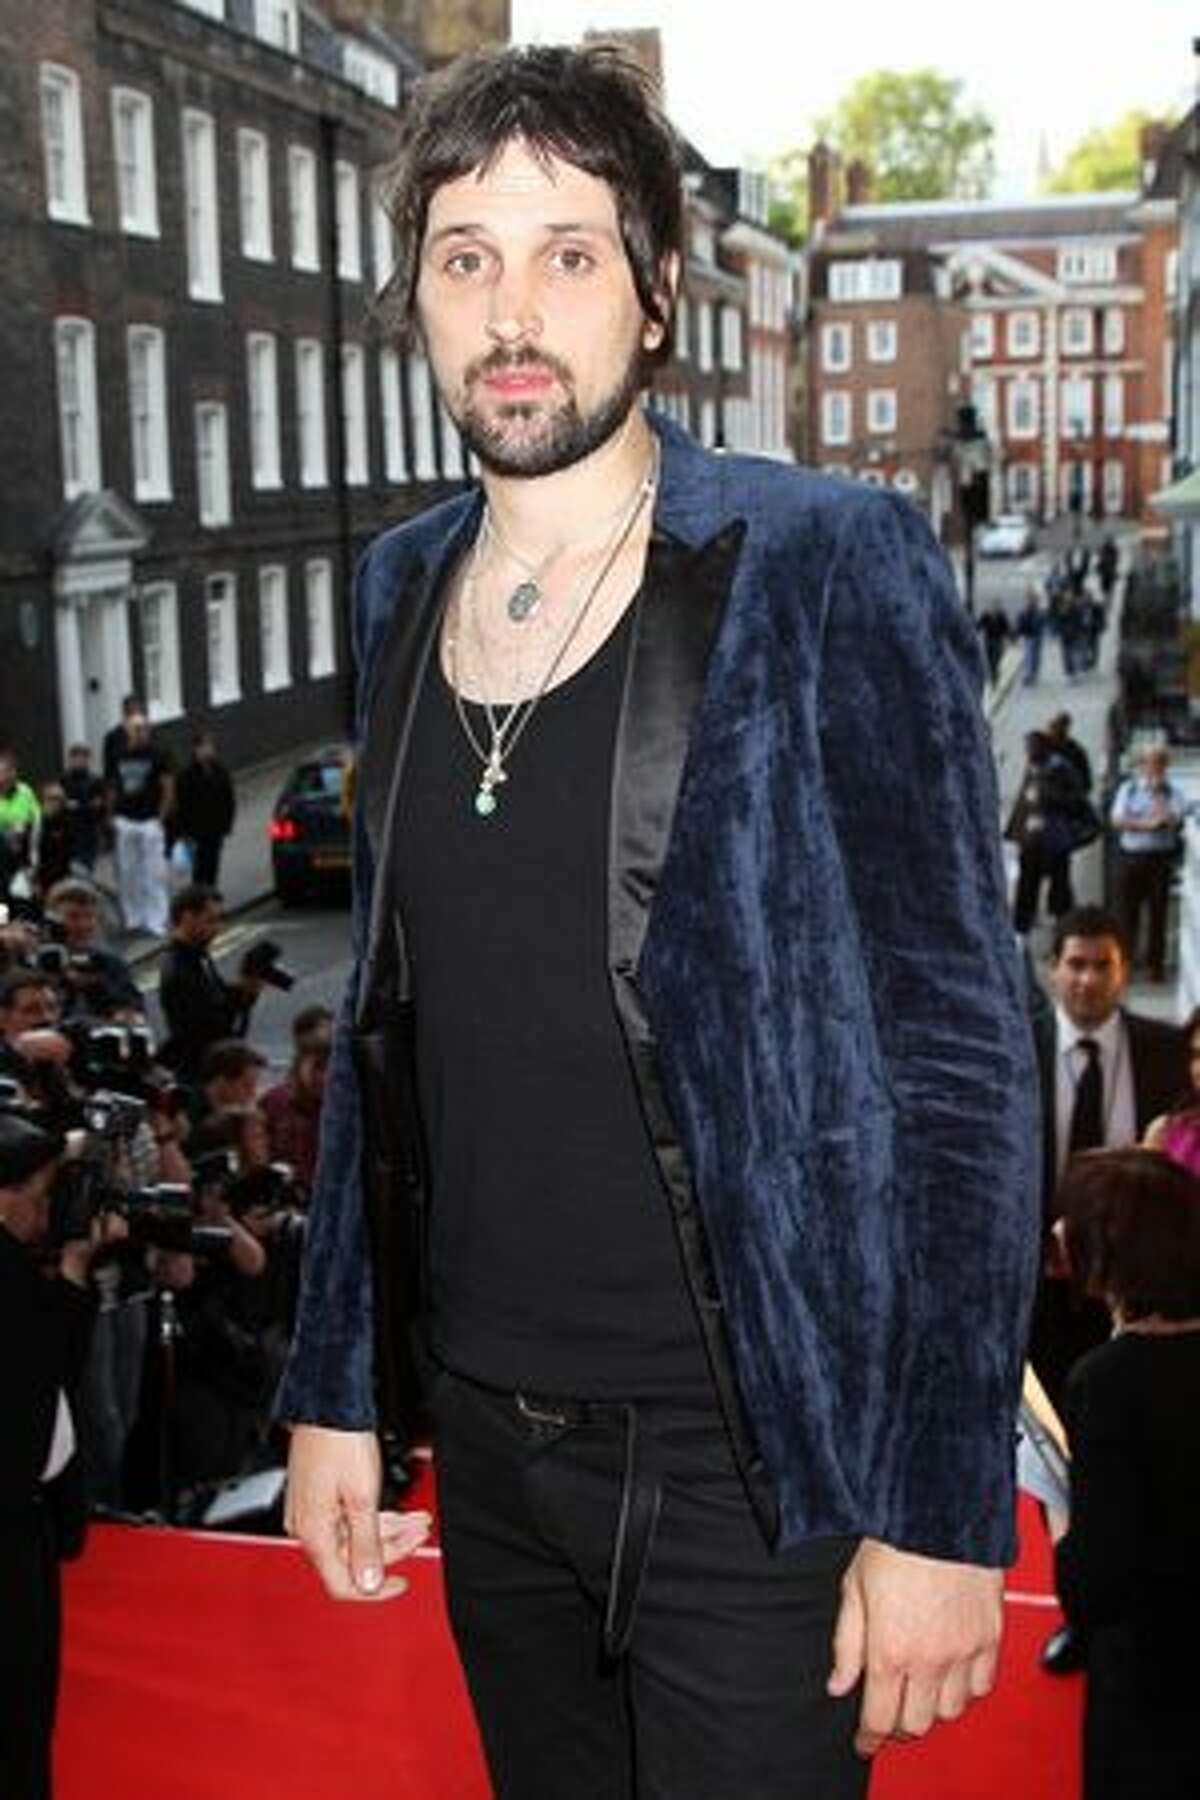 Serge Pizzorno of Kasabian arrives at the Keep A Child Alive Black Ball held at St John's, Smith Square on May 27 in London, England.